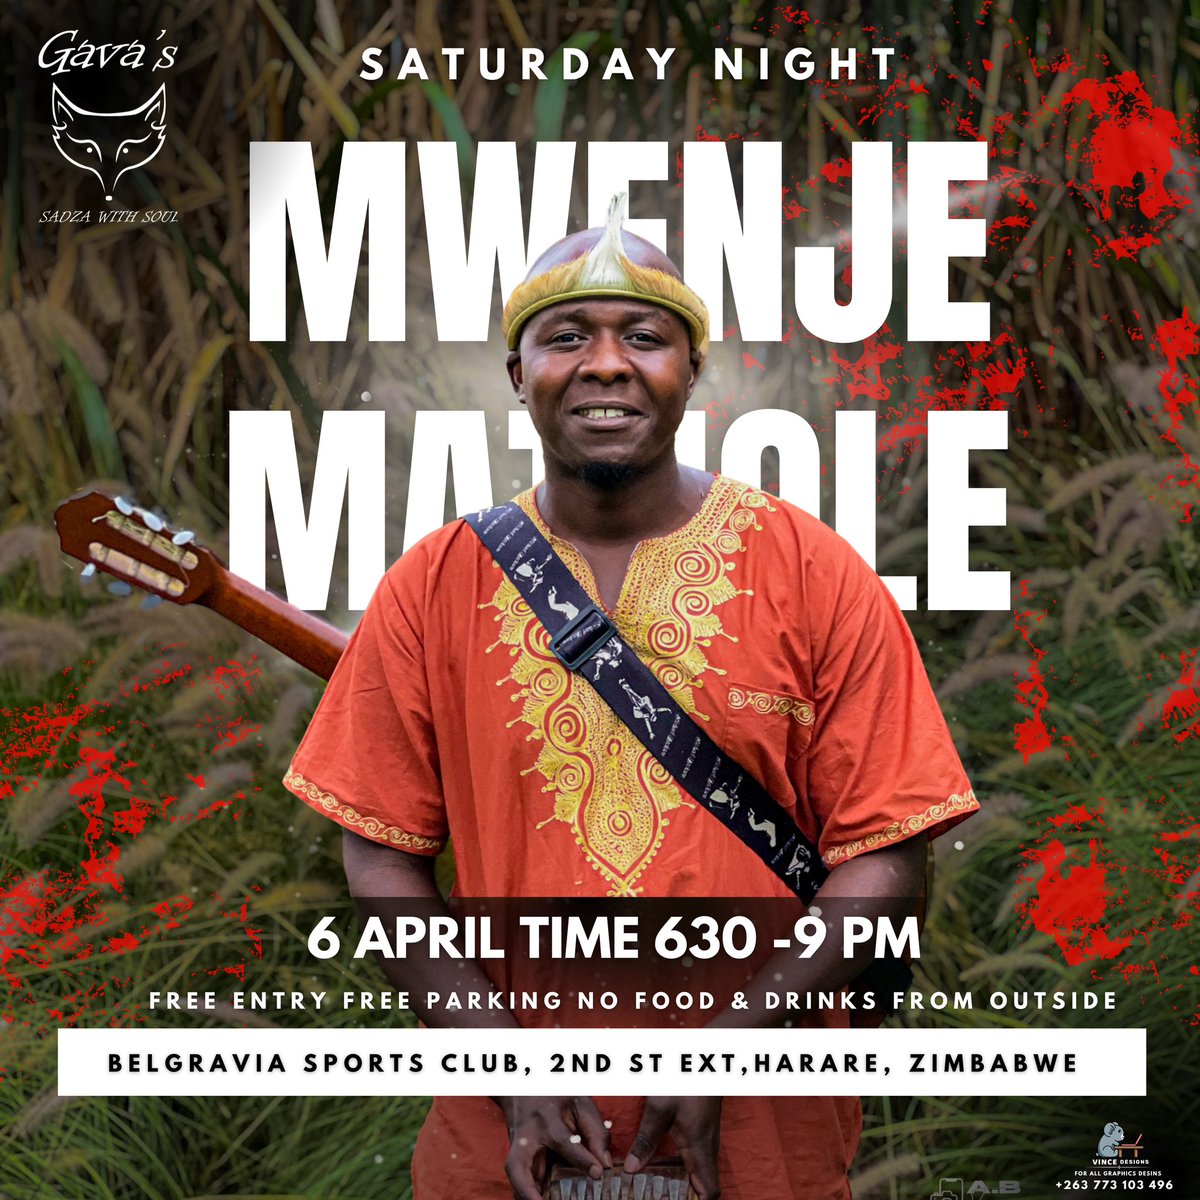 Saturday night at Gava's: Mosi Music + delicious meal = cherished family time. Let’s make this memorable moments together. ❤️‍🔥🔥 #mosimusic #goodvibes